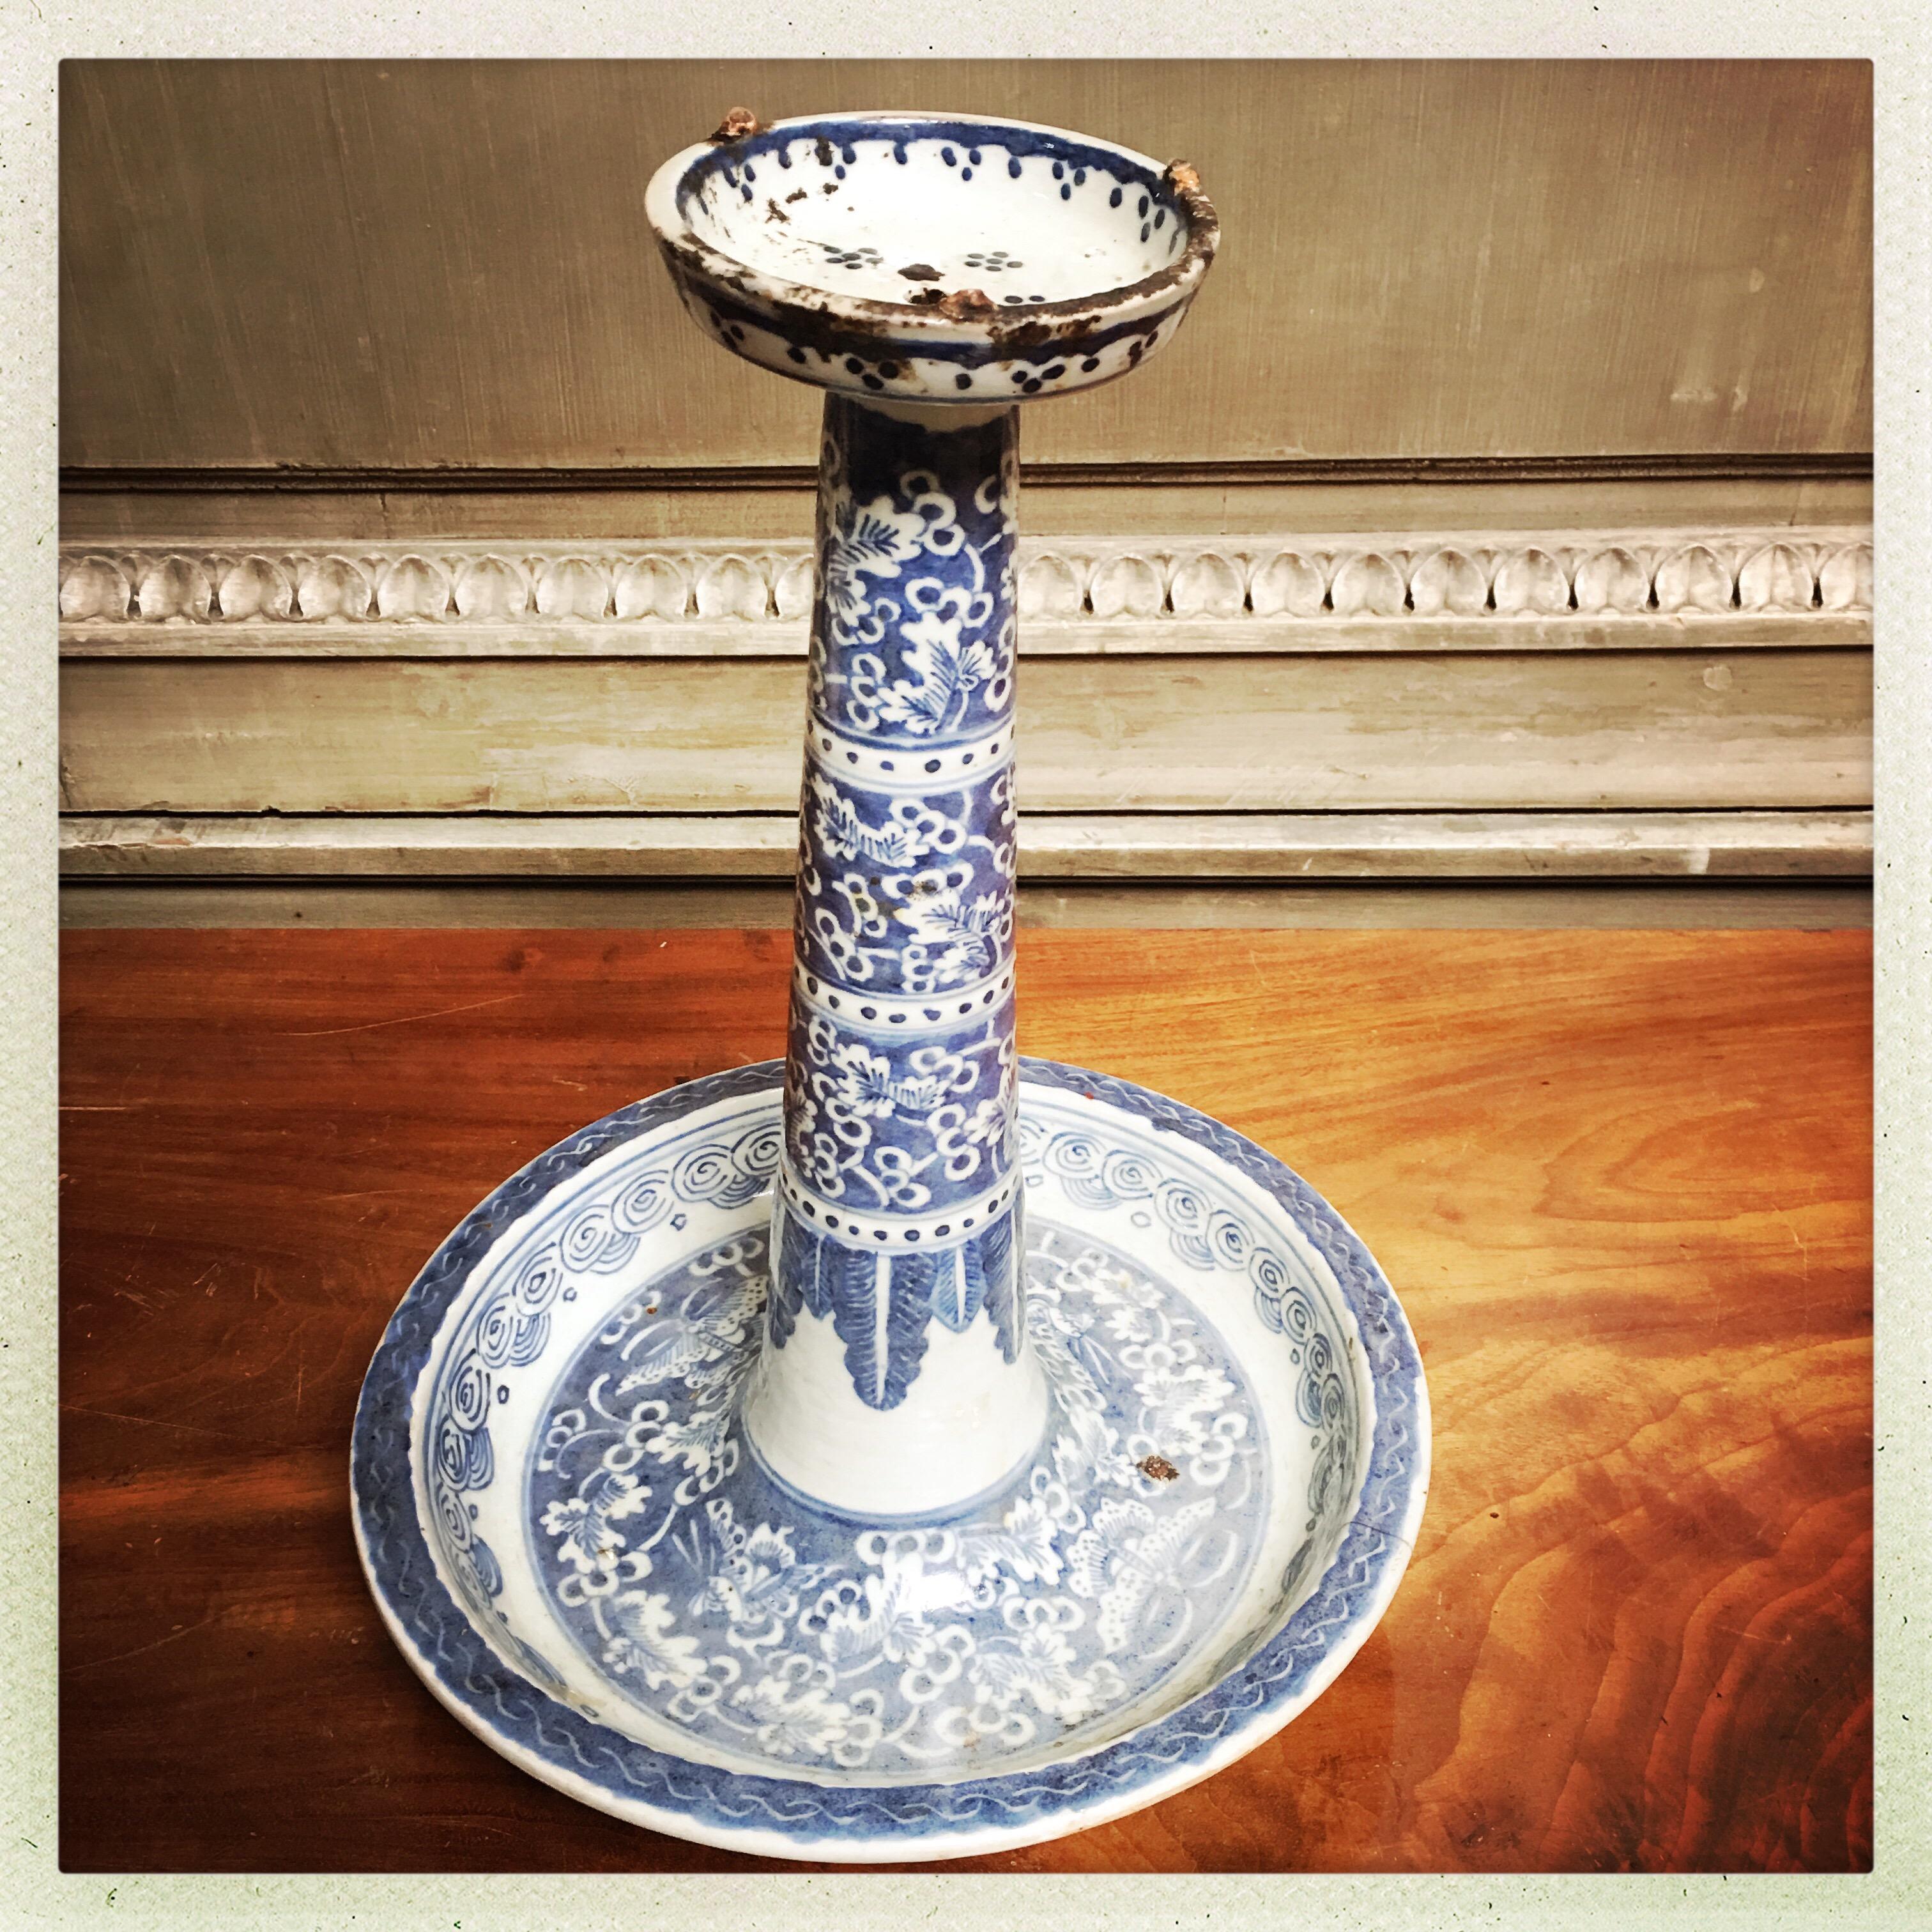 A 19th century Chinese blue and white porcelain candle stand.